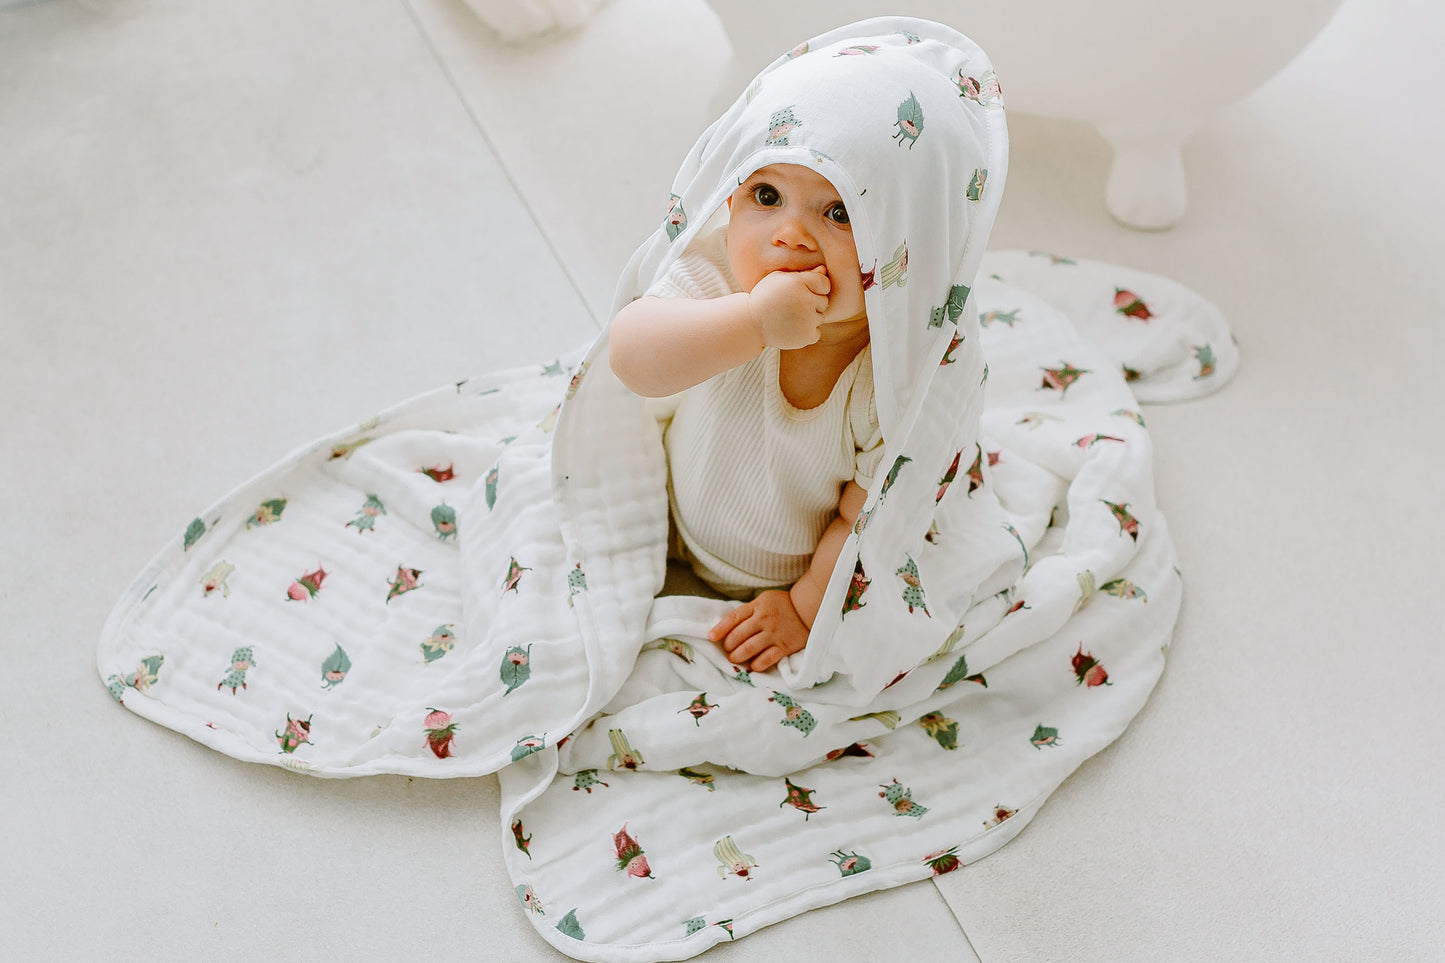 9-Layer Hooded Baby Bath Towel (Organic Cotton) - Pixie Dust